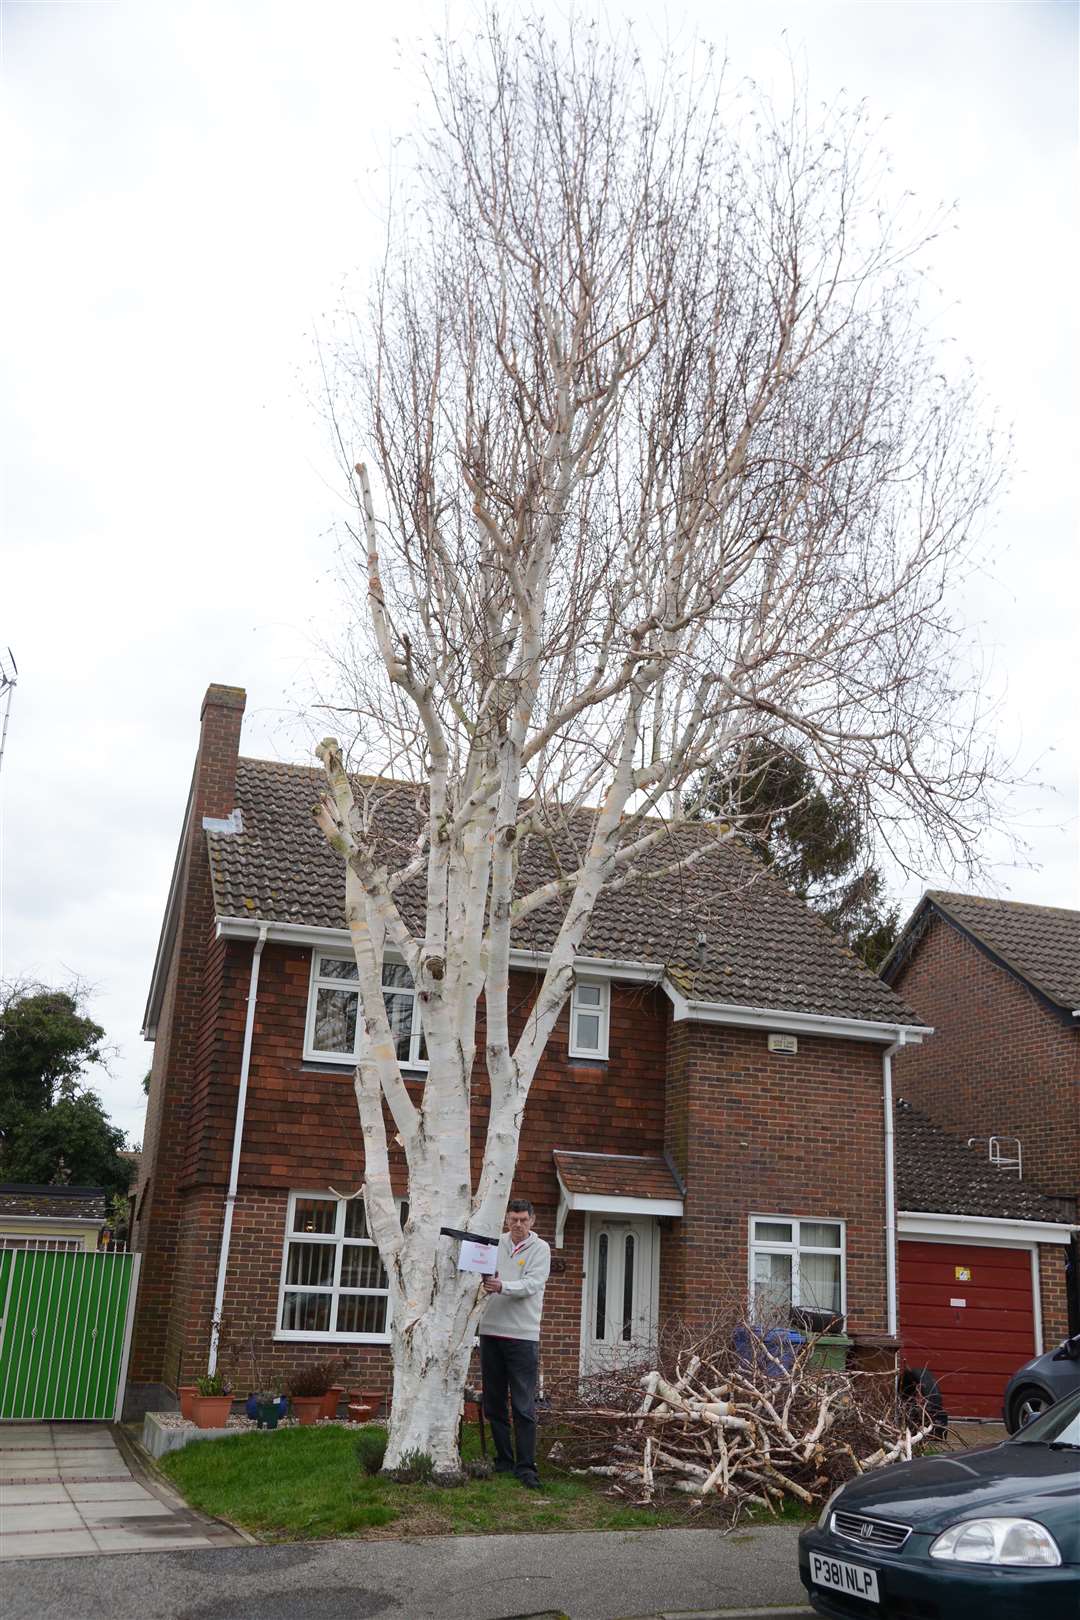 Paul Durkin and the Himalayan Silver Burch tree in his garden which has been vandalised.